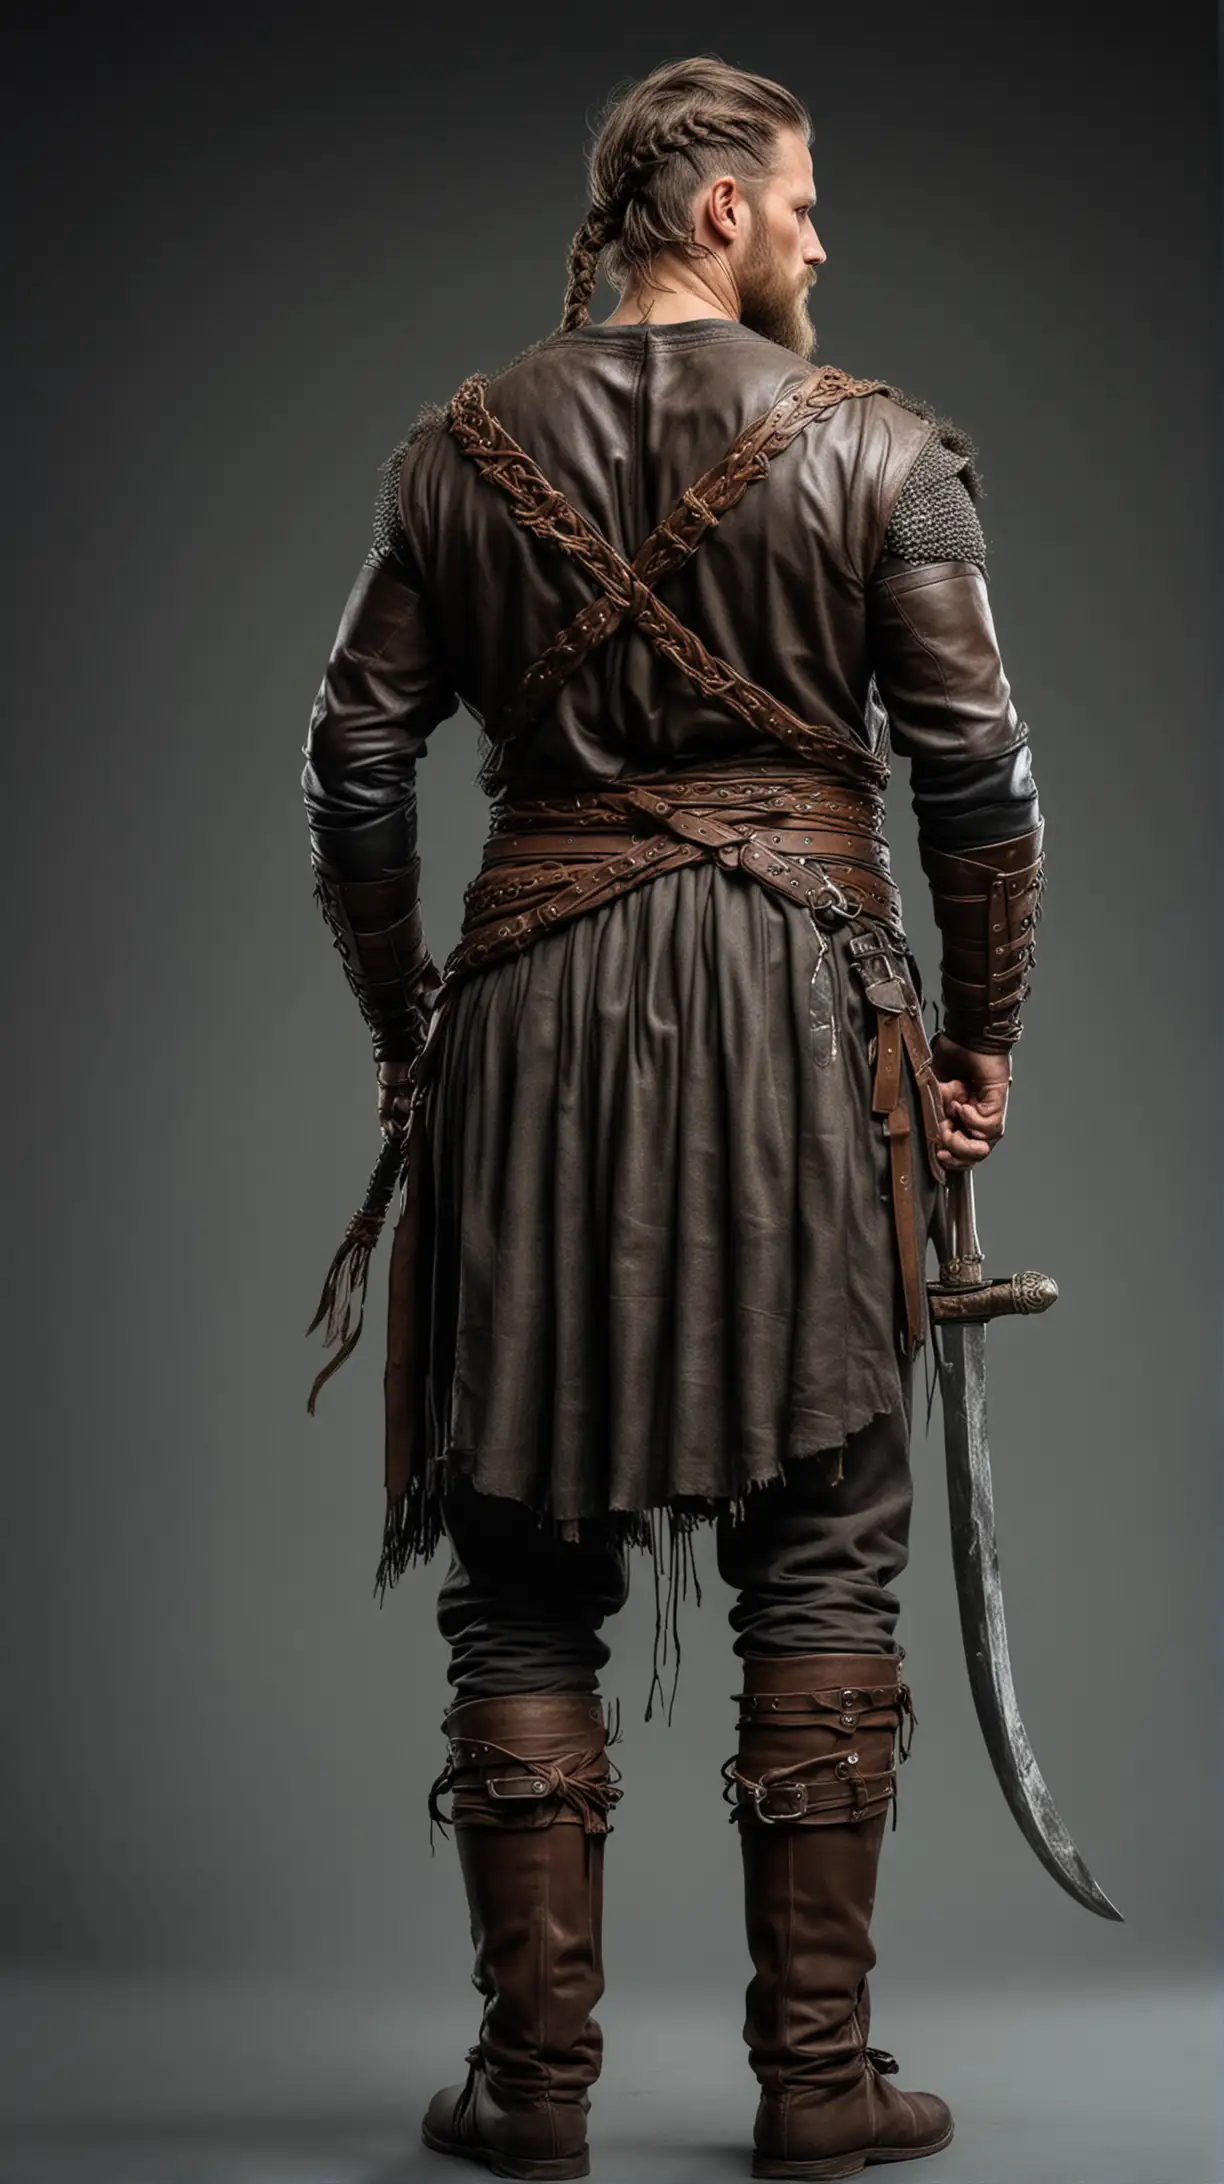 Muscular Viking Warrior Facing Forward with Leather Sleeves